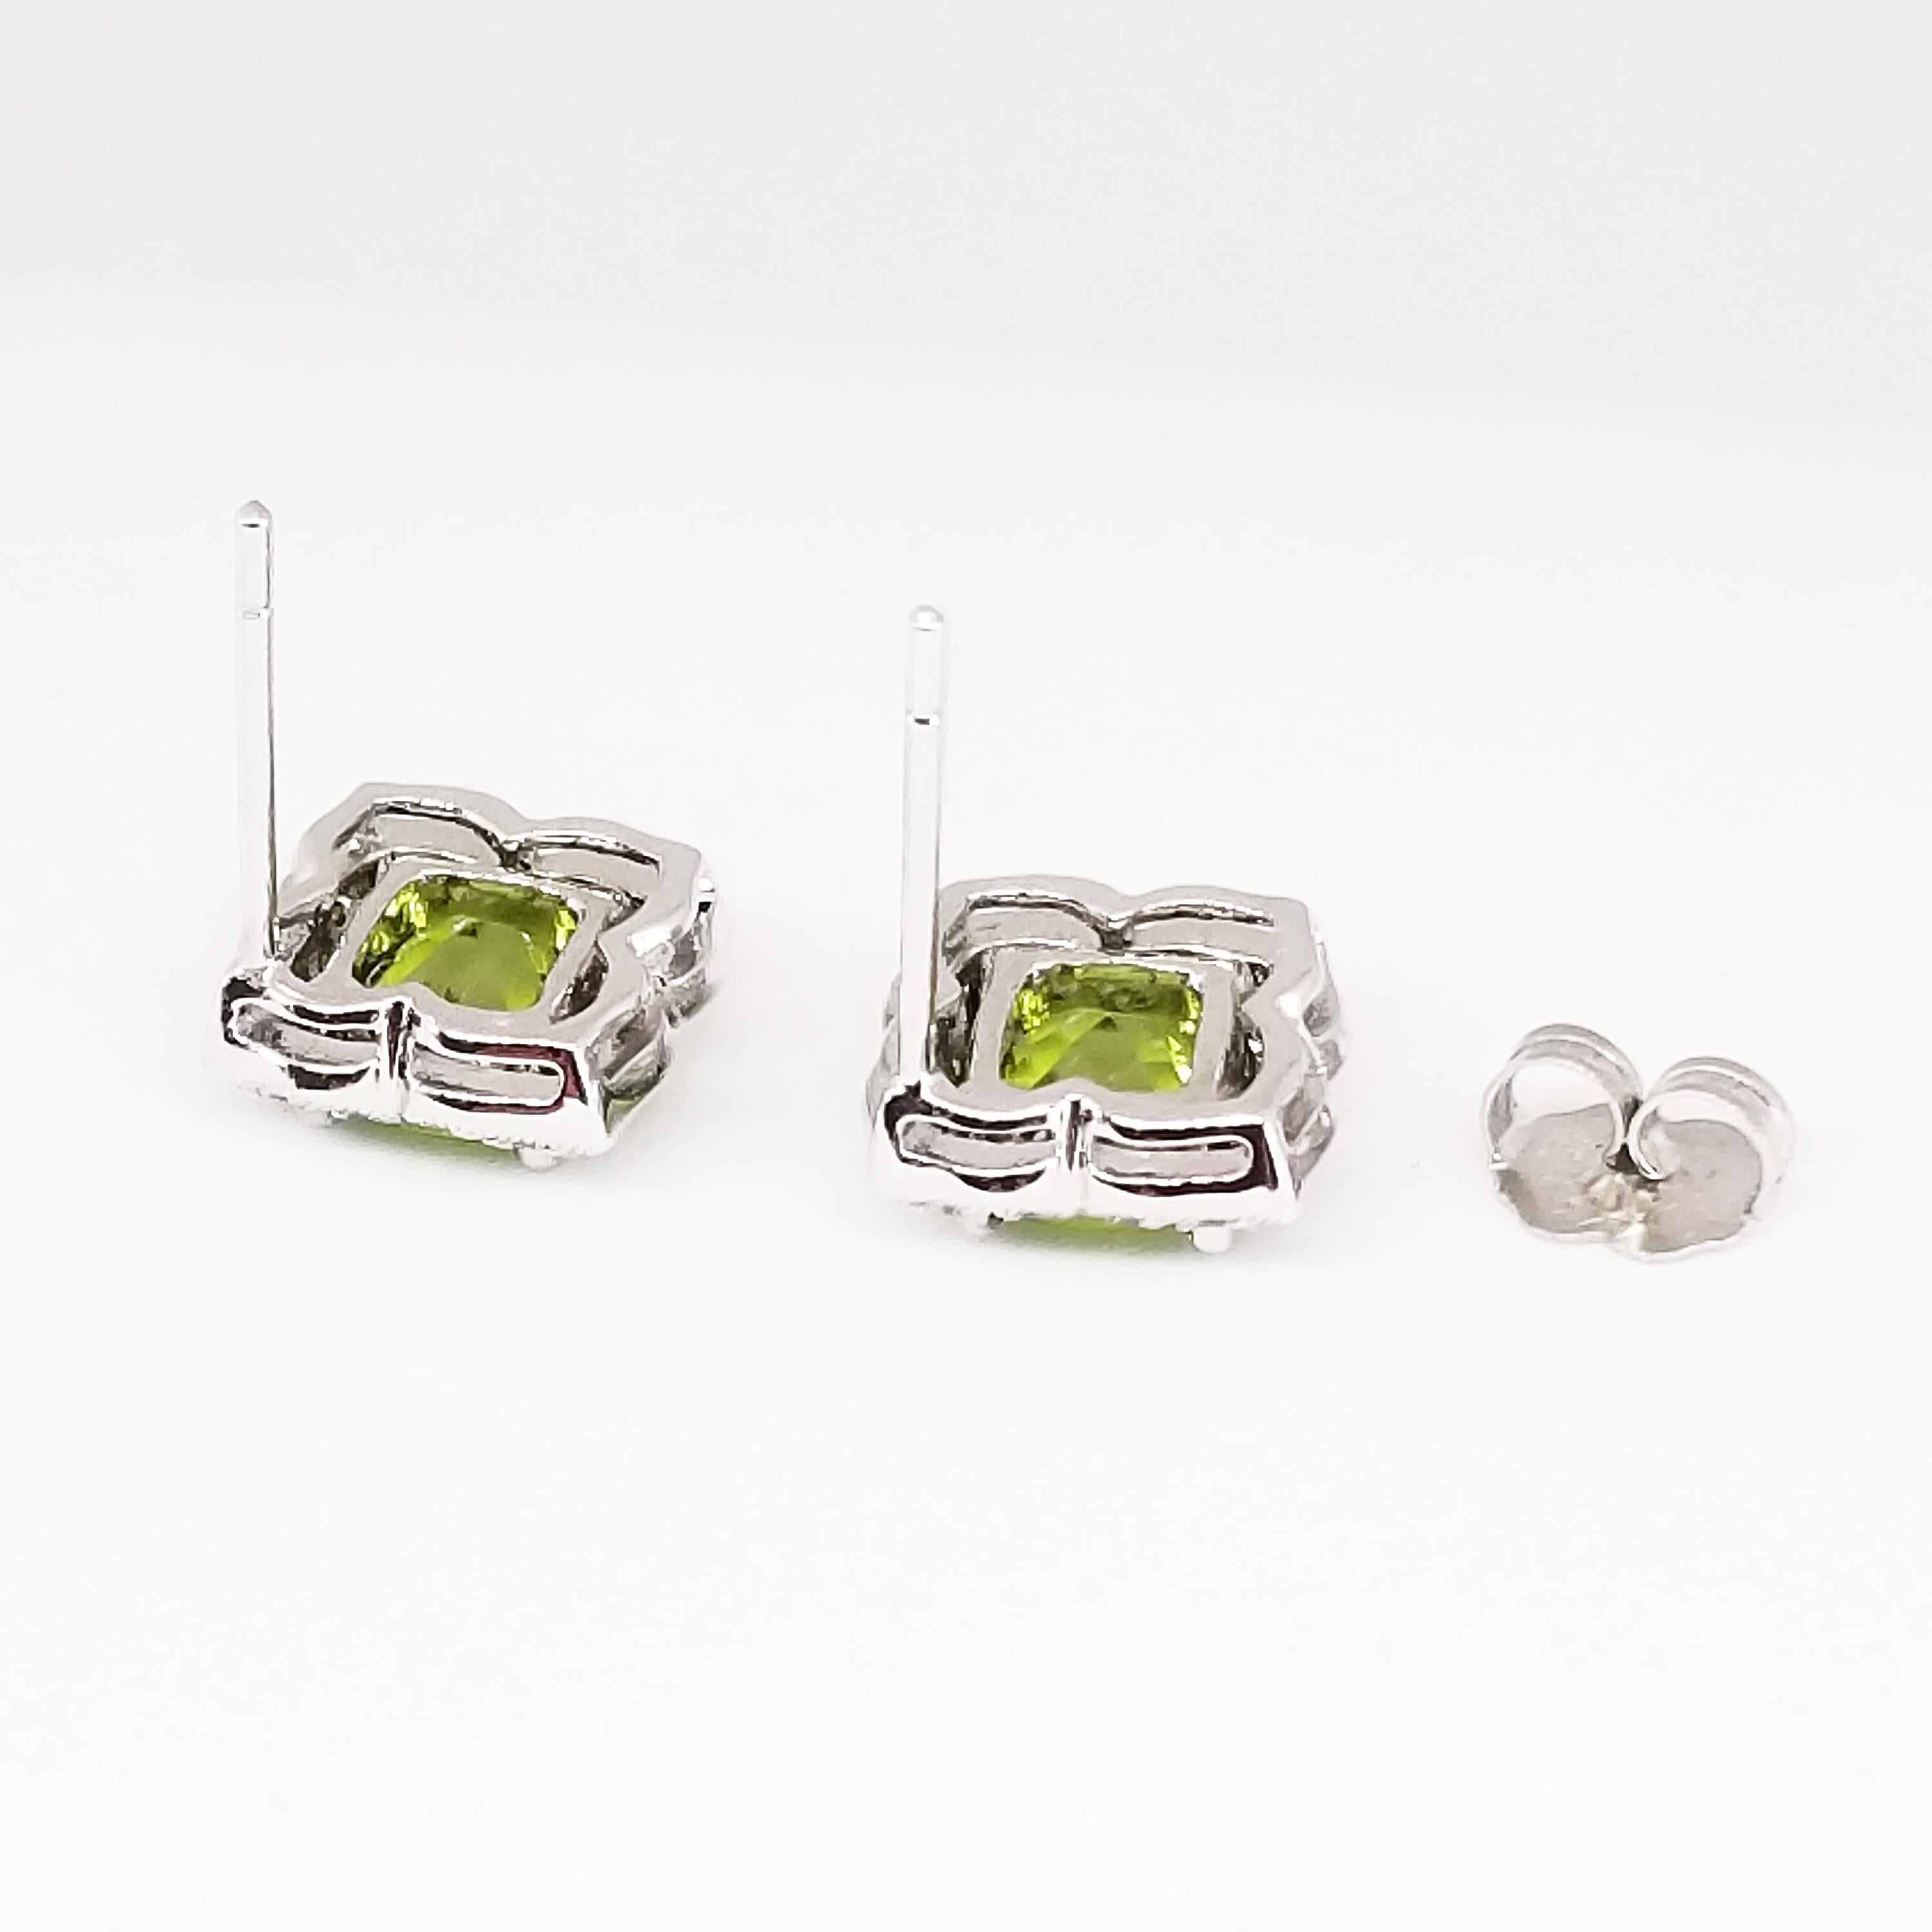 This Feminine pair of Clover Shaped Floret Earrings feature two Cushion Shape, Checkerboard Faceted Green Peridot of 2.18 Carats combined weight. The Gem Quality stones are of Grass Green hue and are prong set, surrounded by a Clover of Round